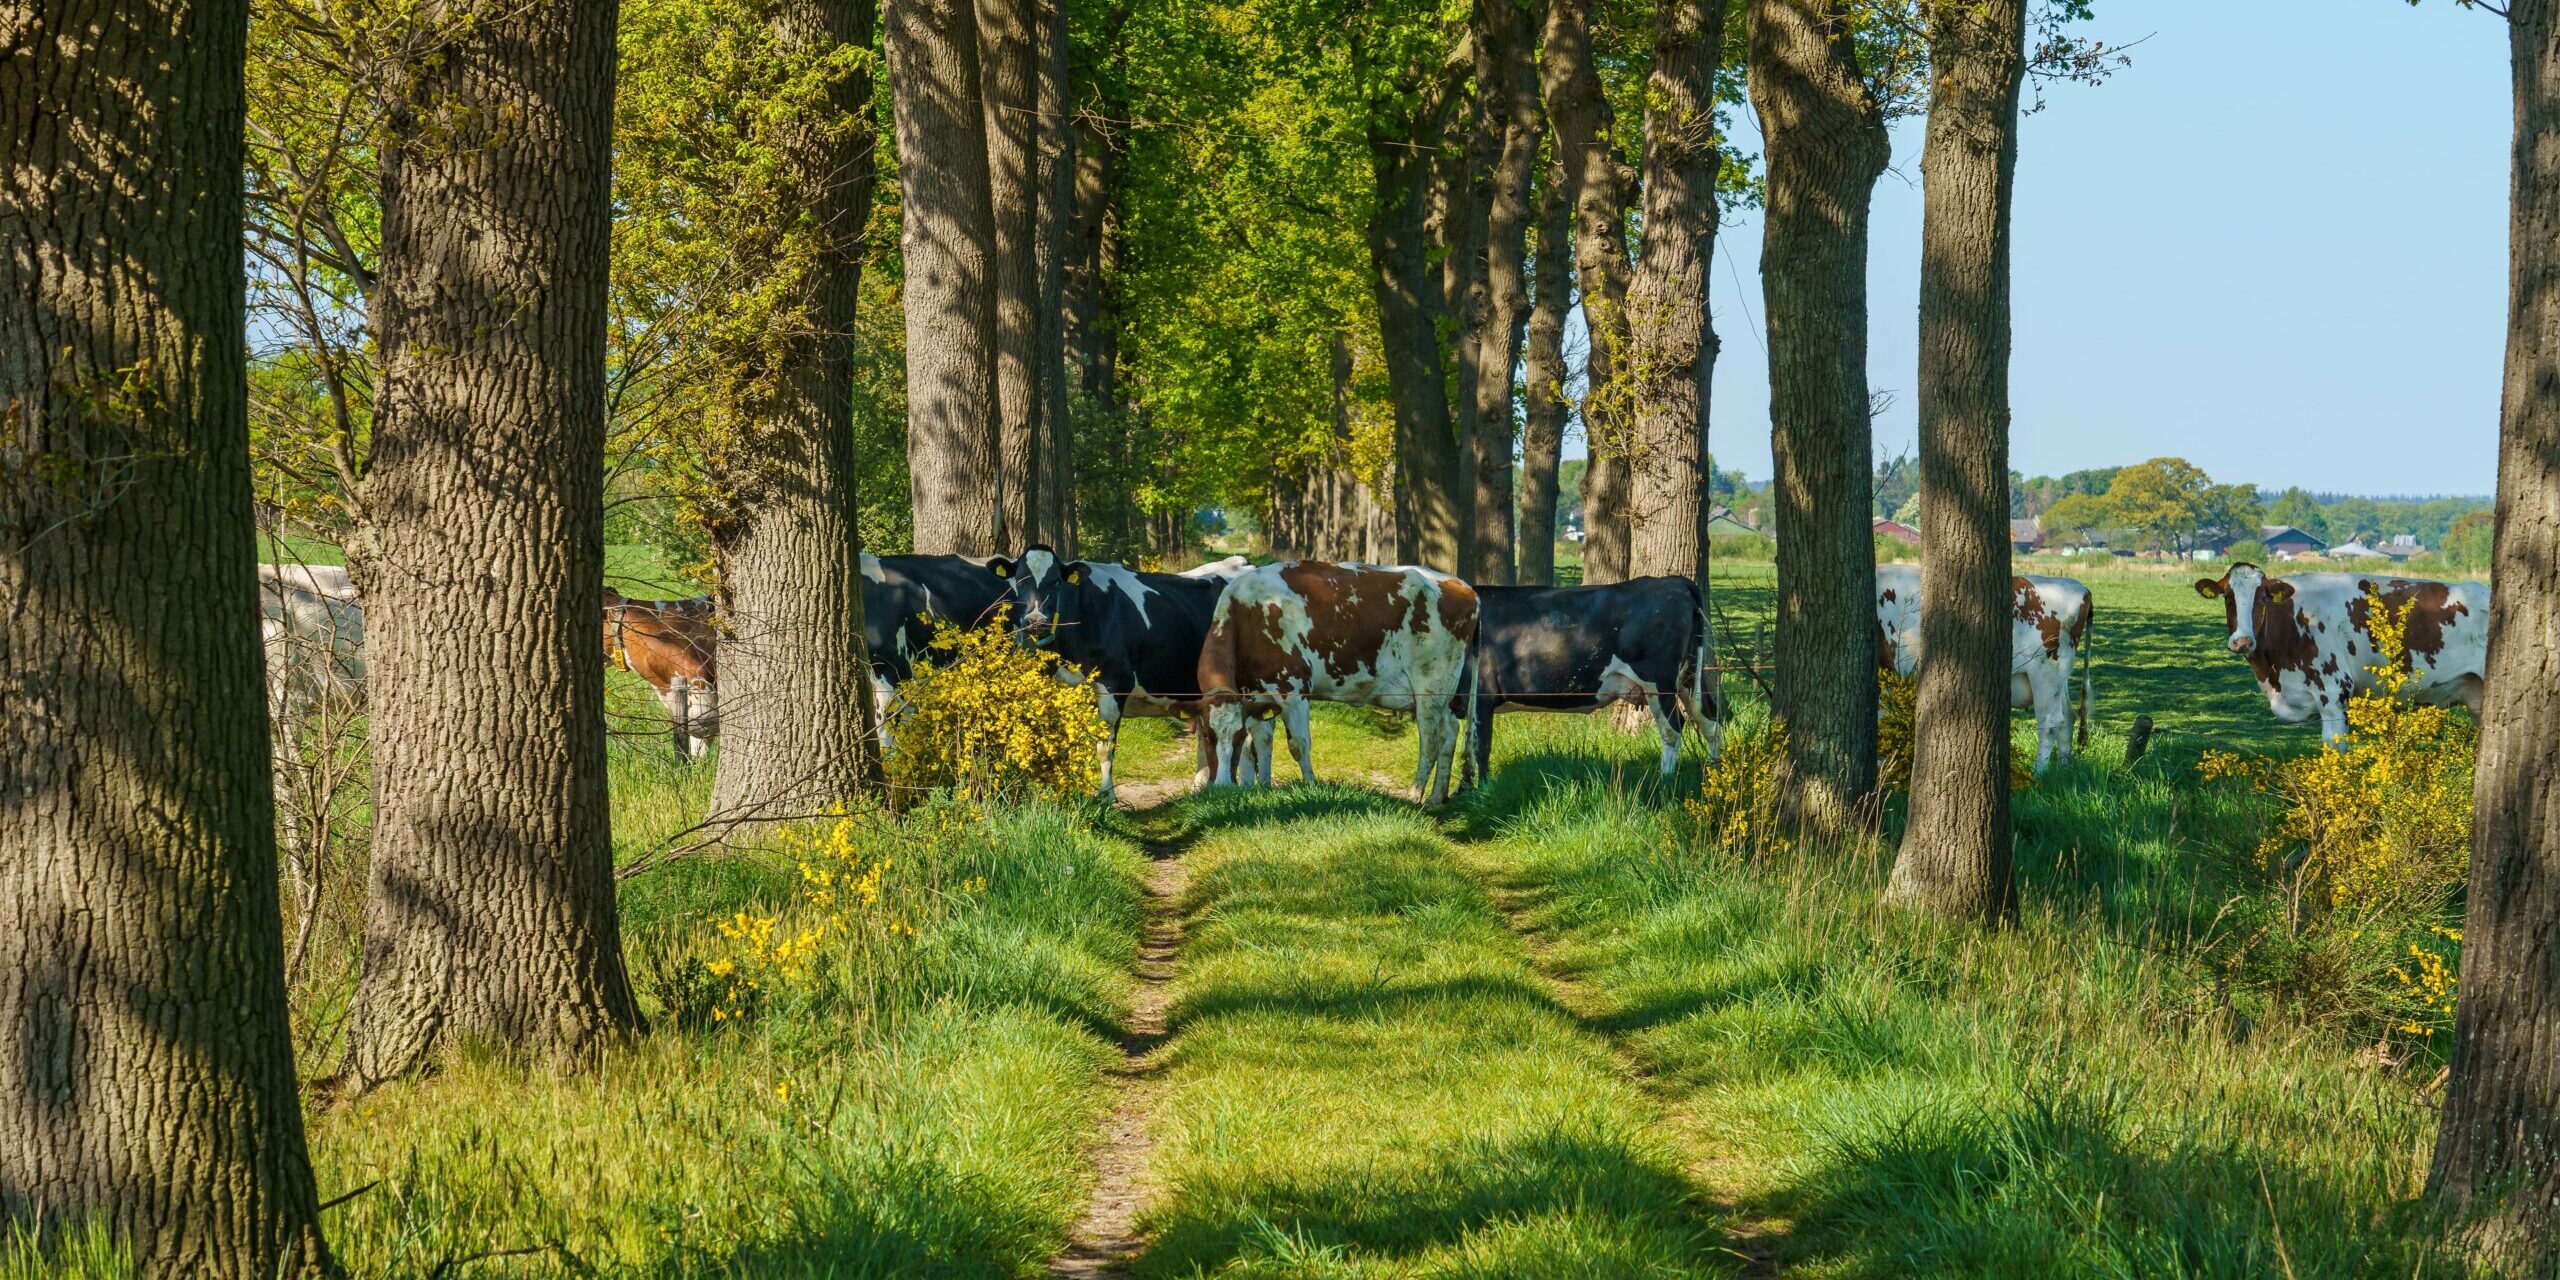 A herd of Dutch cows crossing the road surrounded by a lot of tall trees